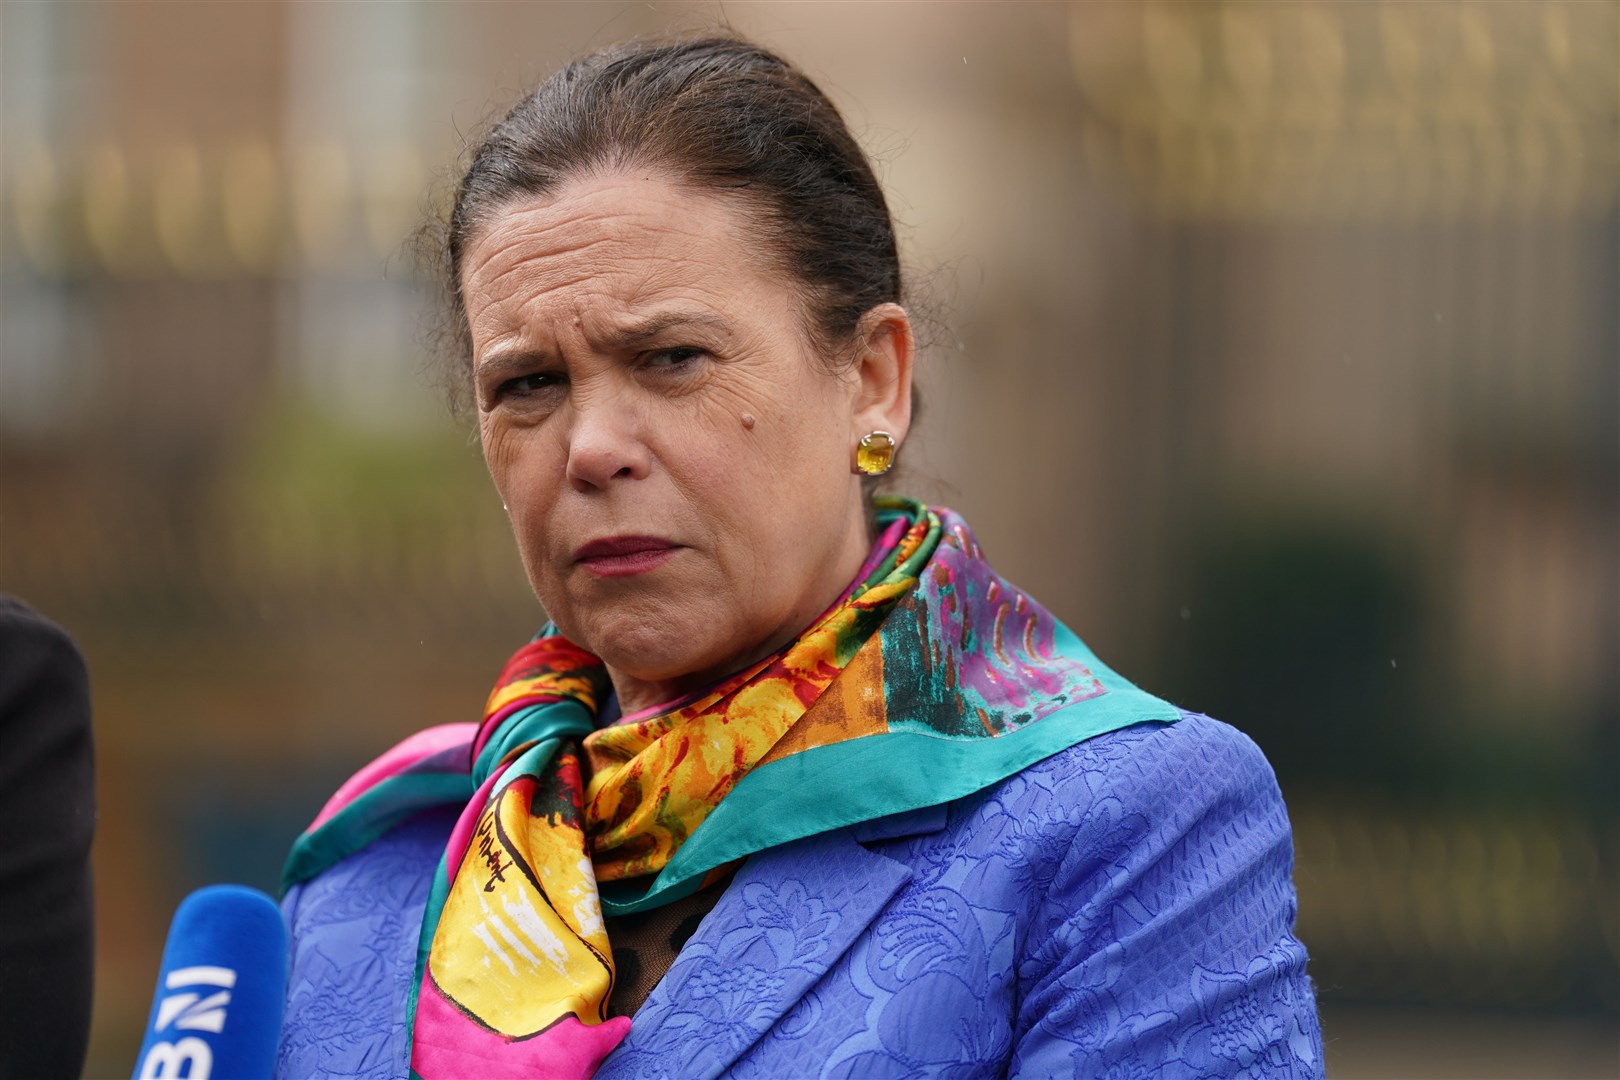 Sinn Fein Party leader Mary Lou McDonald speaking to the media (Brian Lawless/PA)